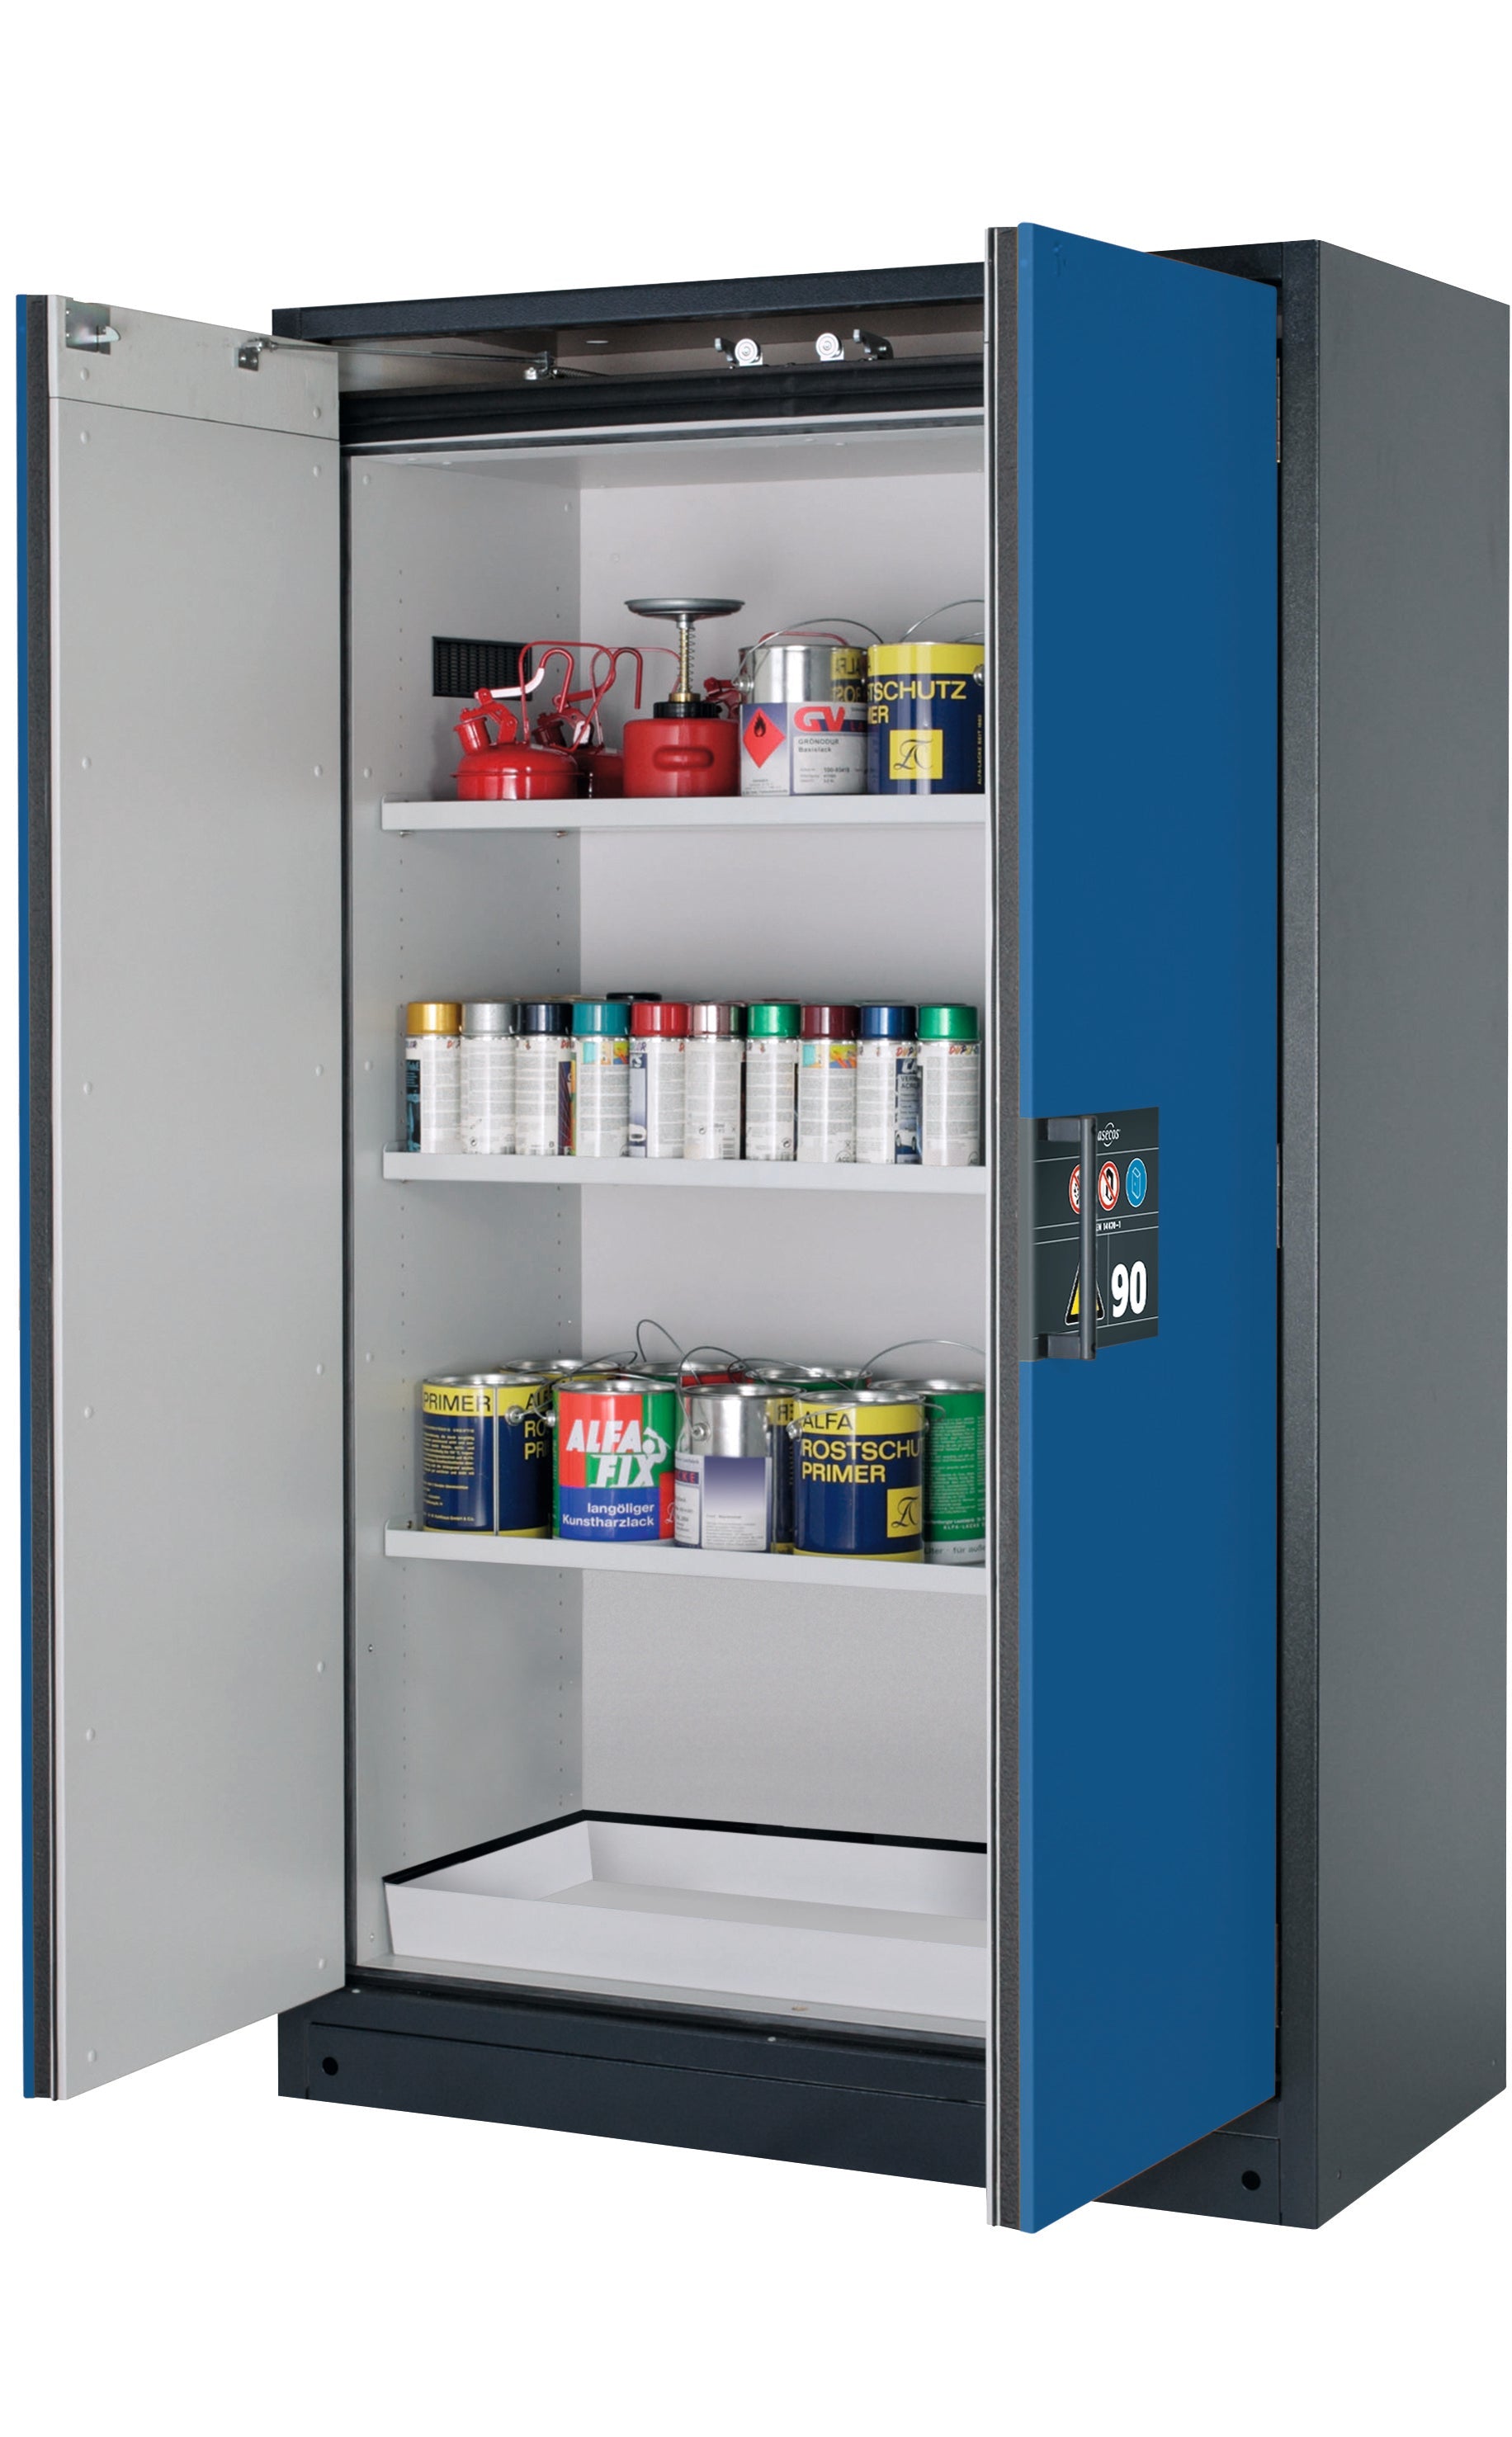 Type 90 safety storage cabinet Q-CLASSIC-90 model Q90.195.120 in gentian blue RAL 5010 with 3x shelf standard (sheet steel),